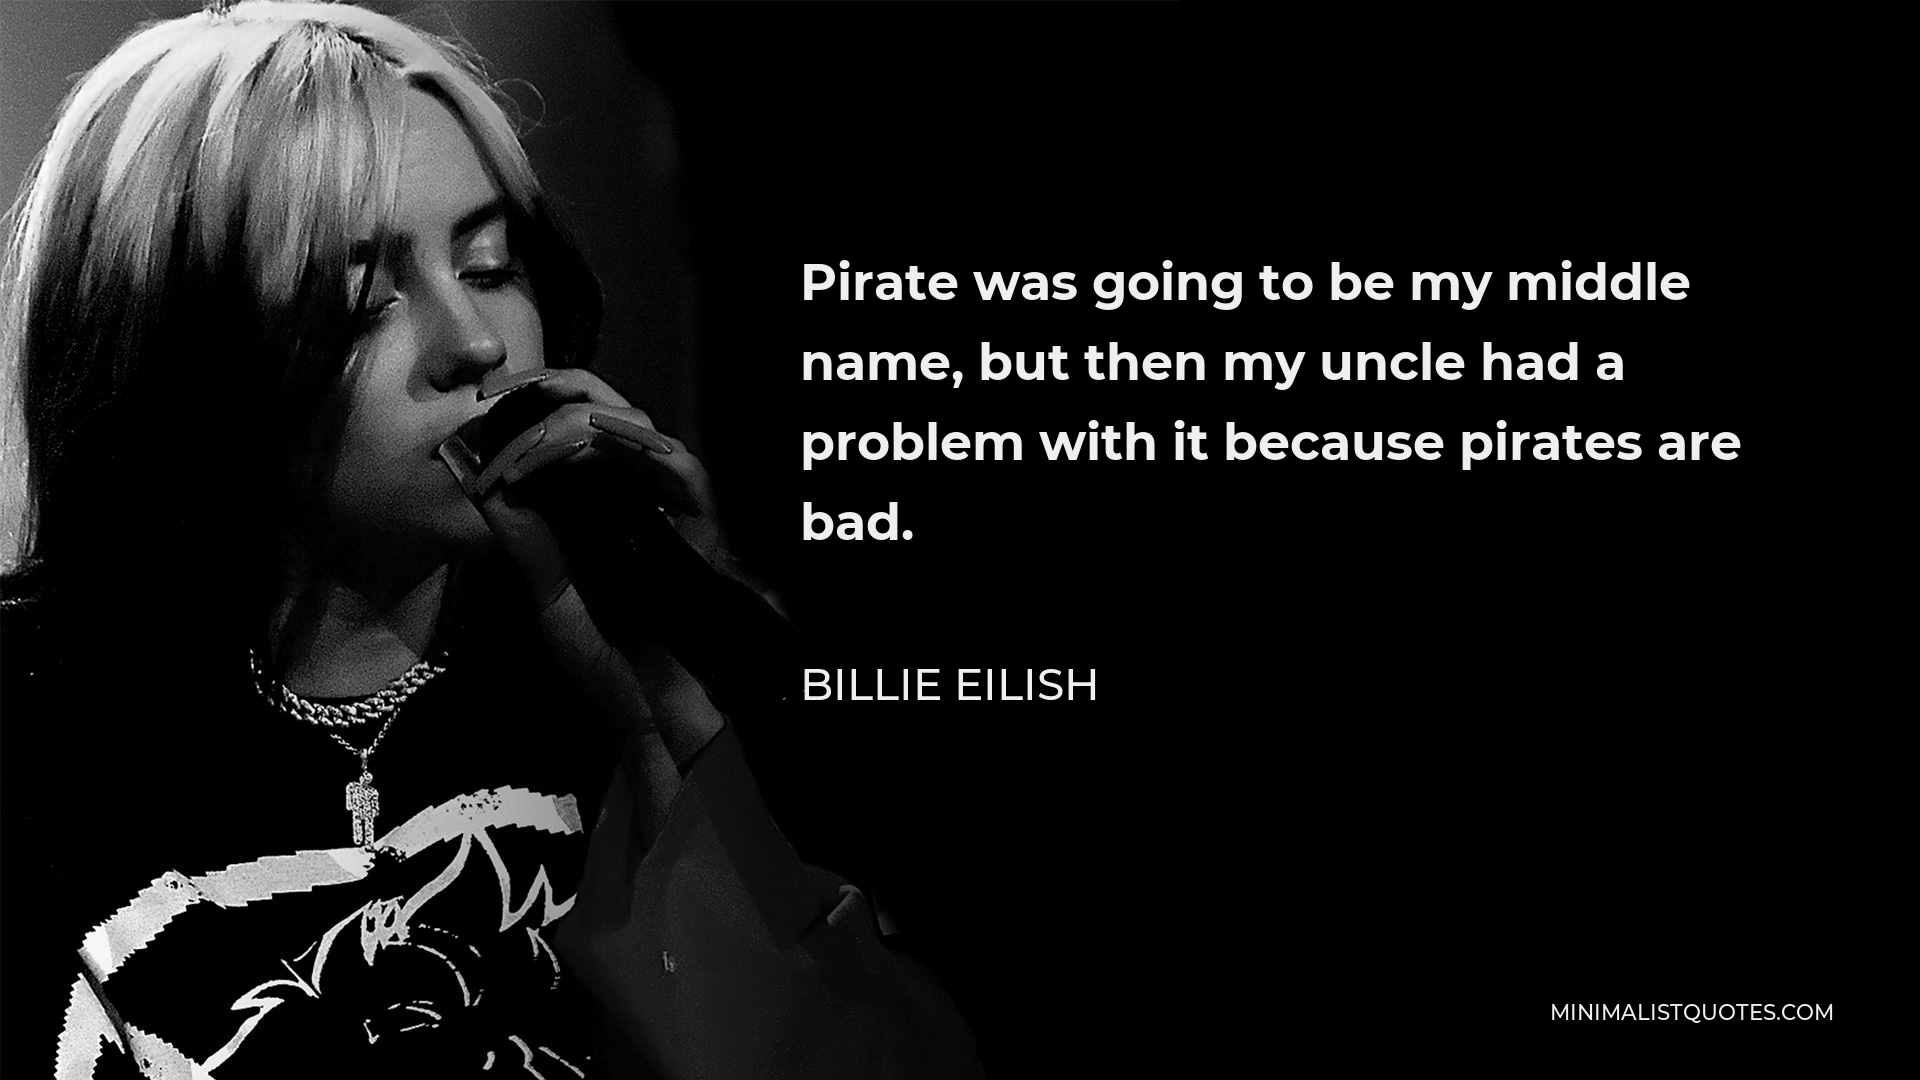 Billie Eilish Quote - Pirate was going to be my middle name, but then my uncle had a problem with it because pirates are bad.